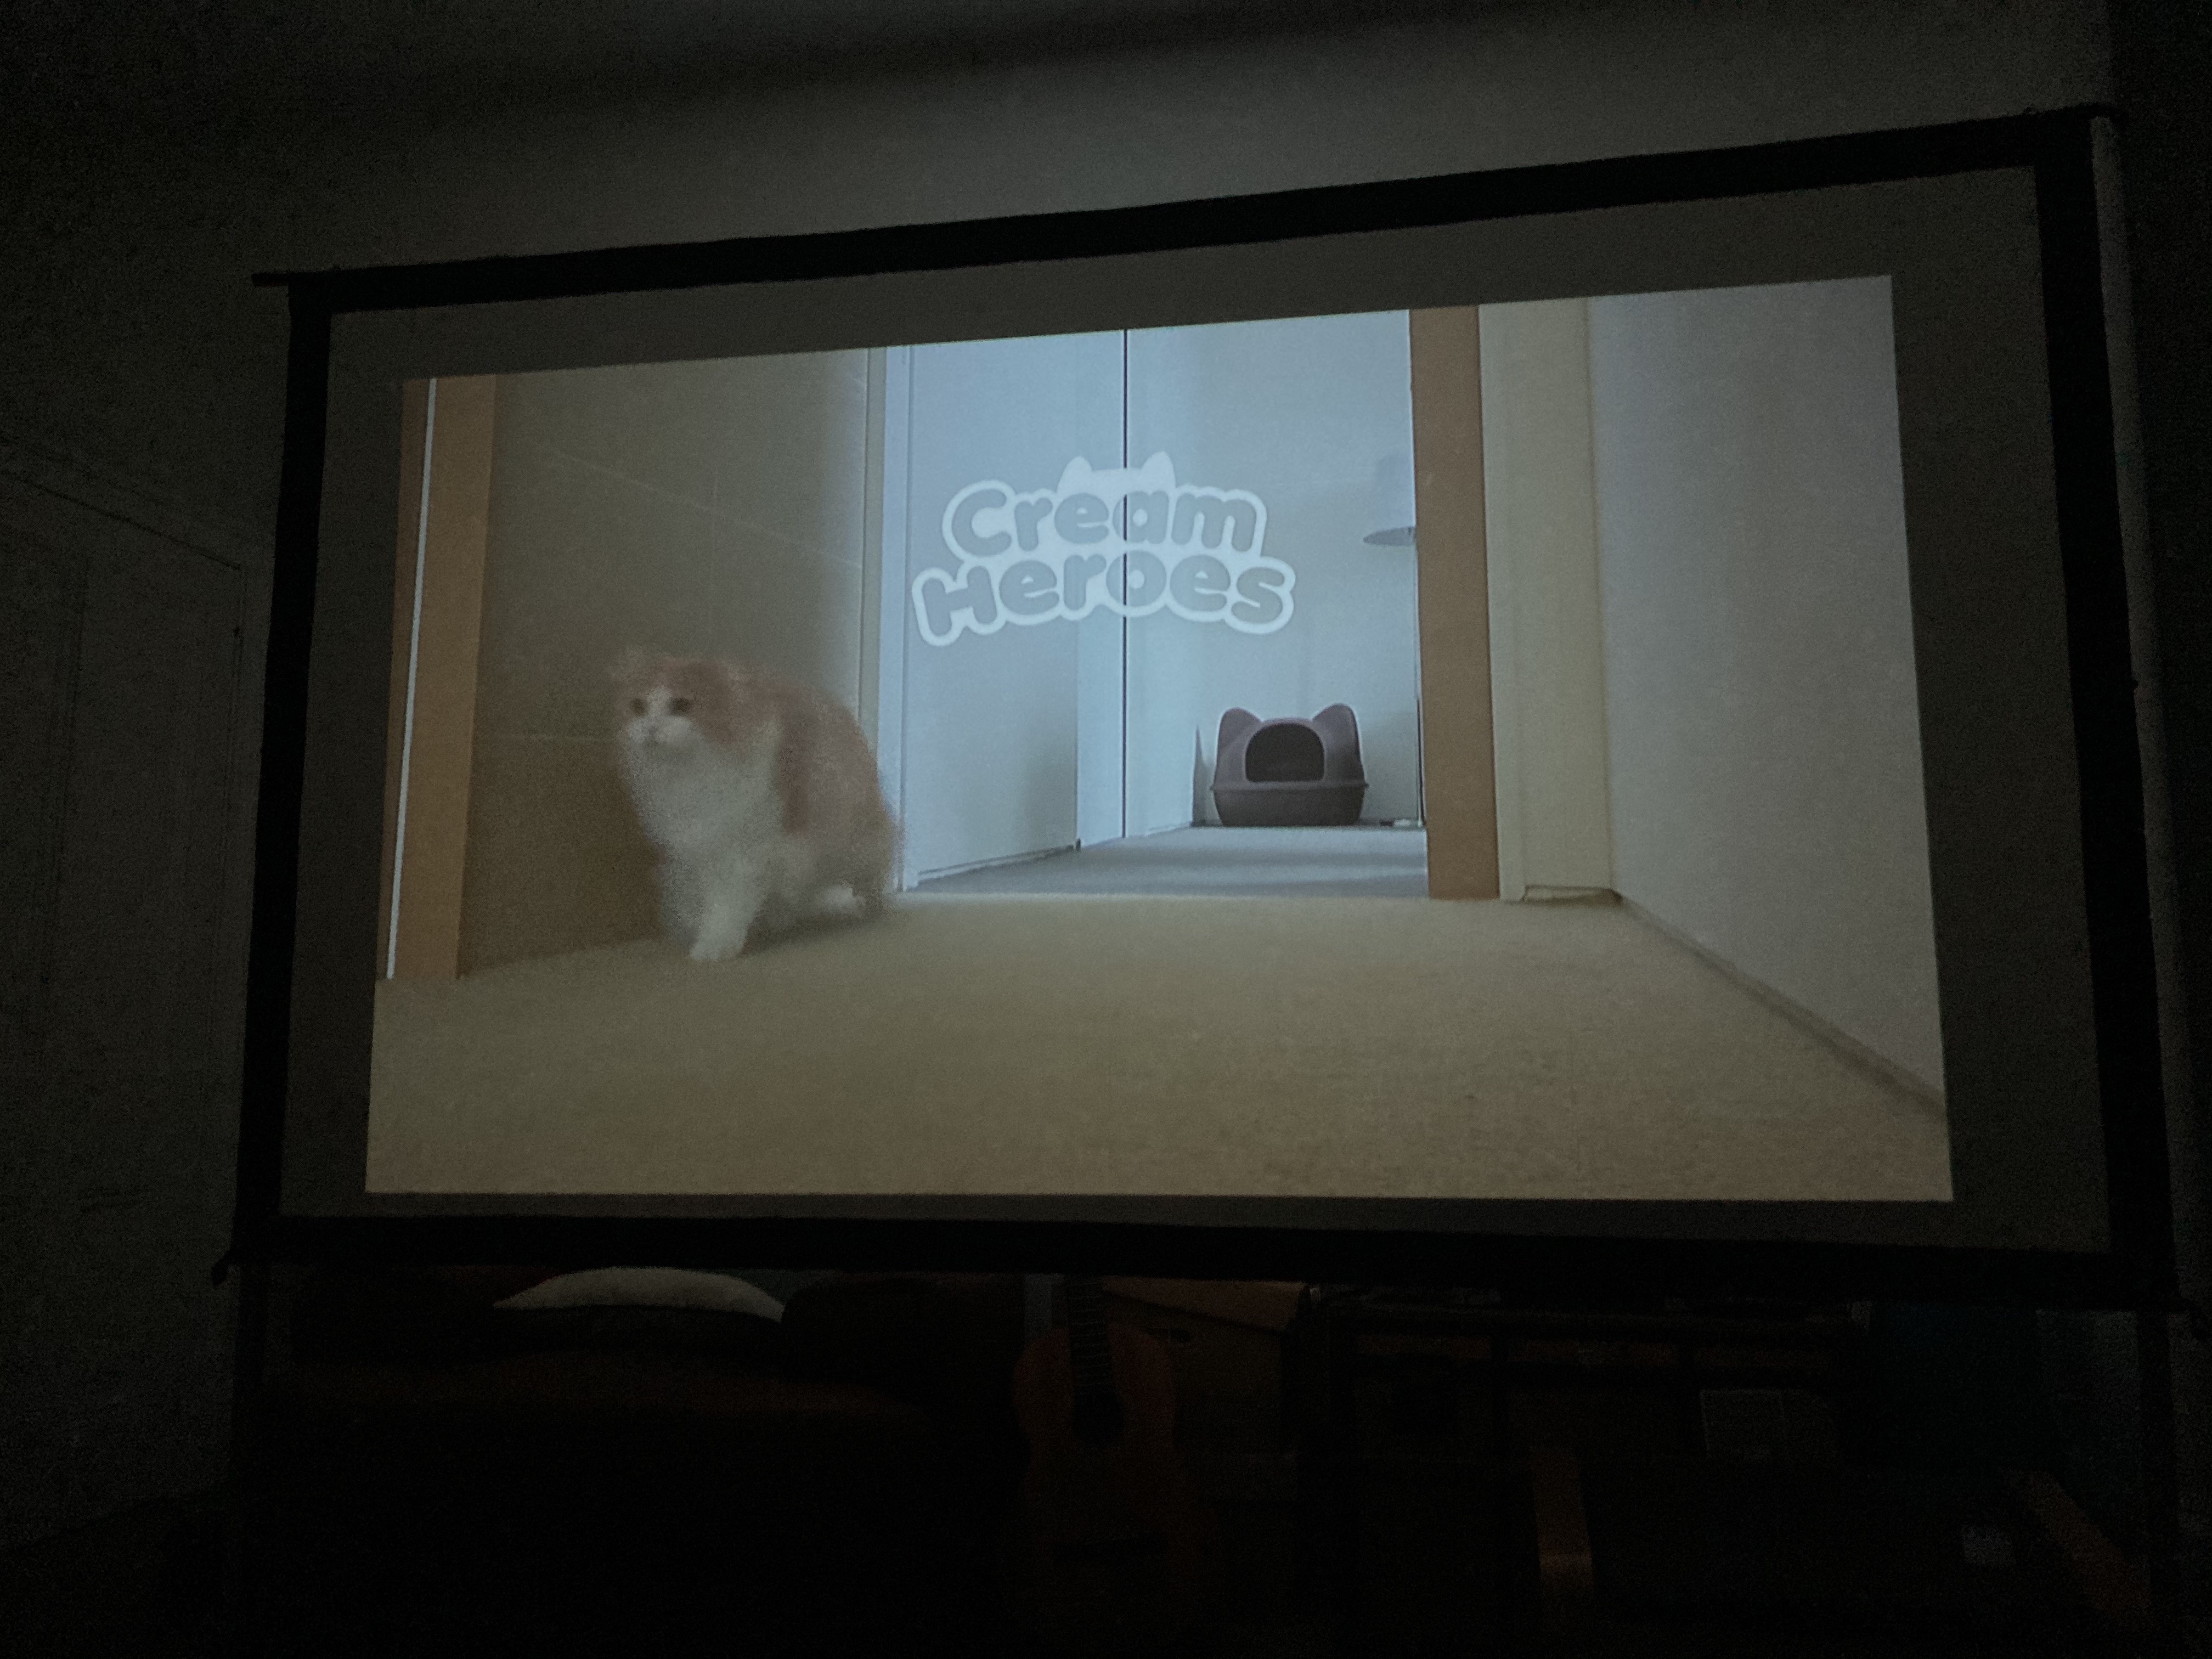 Essential viewing of cat videos when testing out the projector screen at home